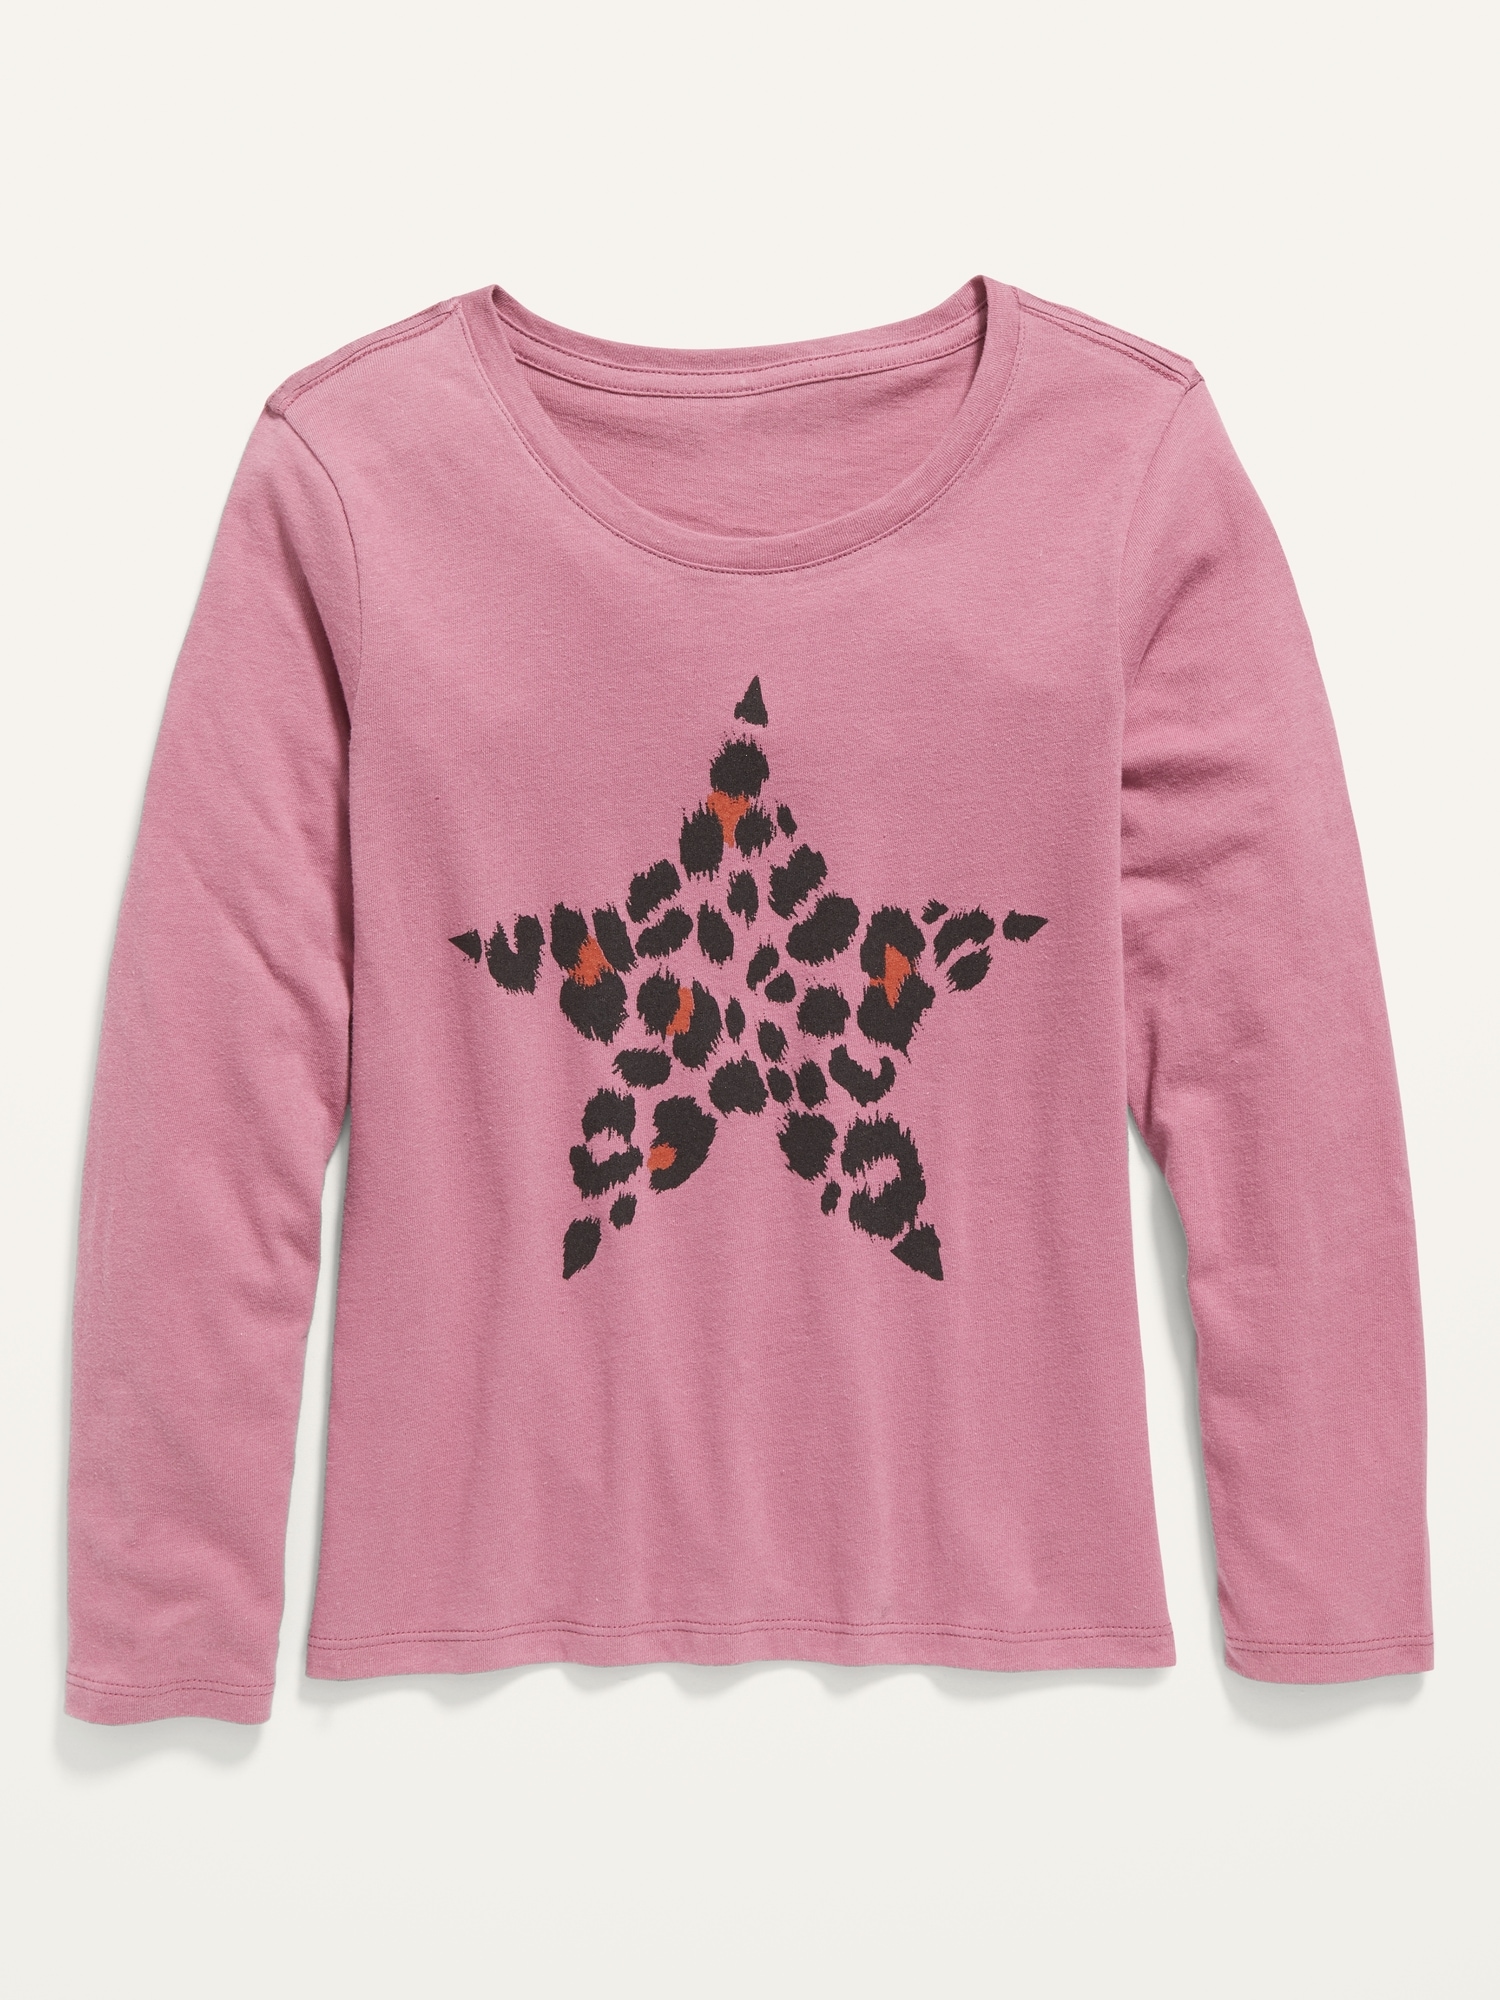 Long-Sleeve Graphic Tee for Girls